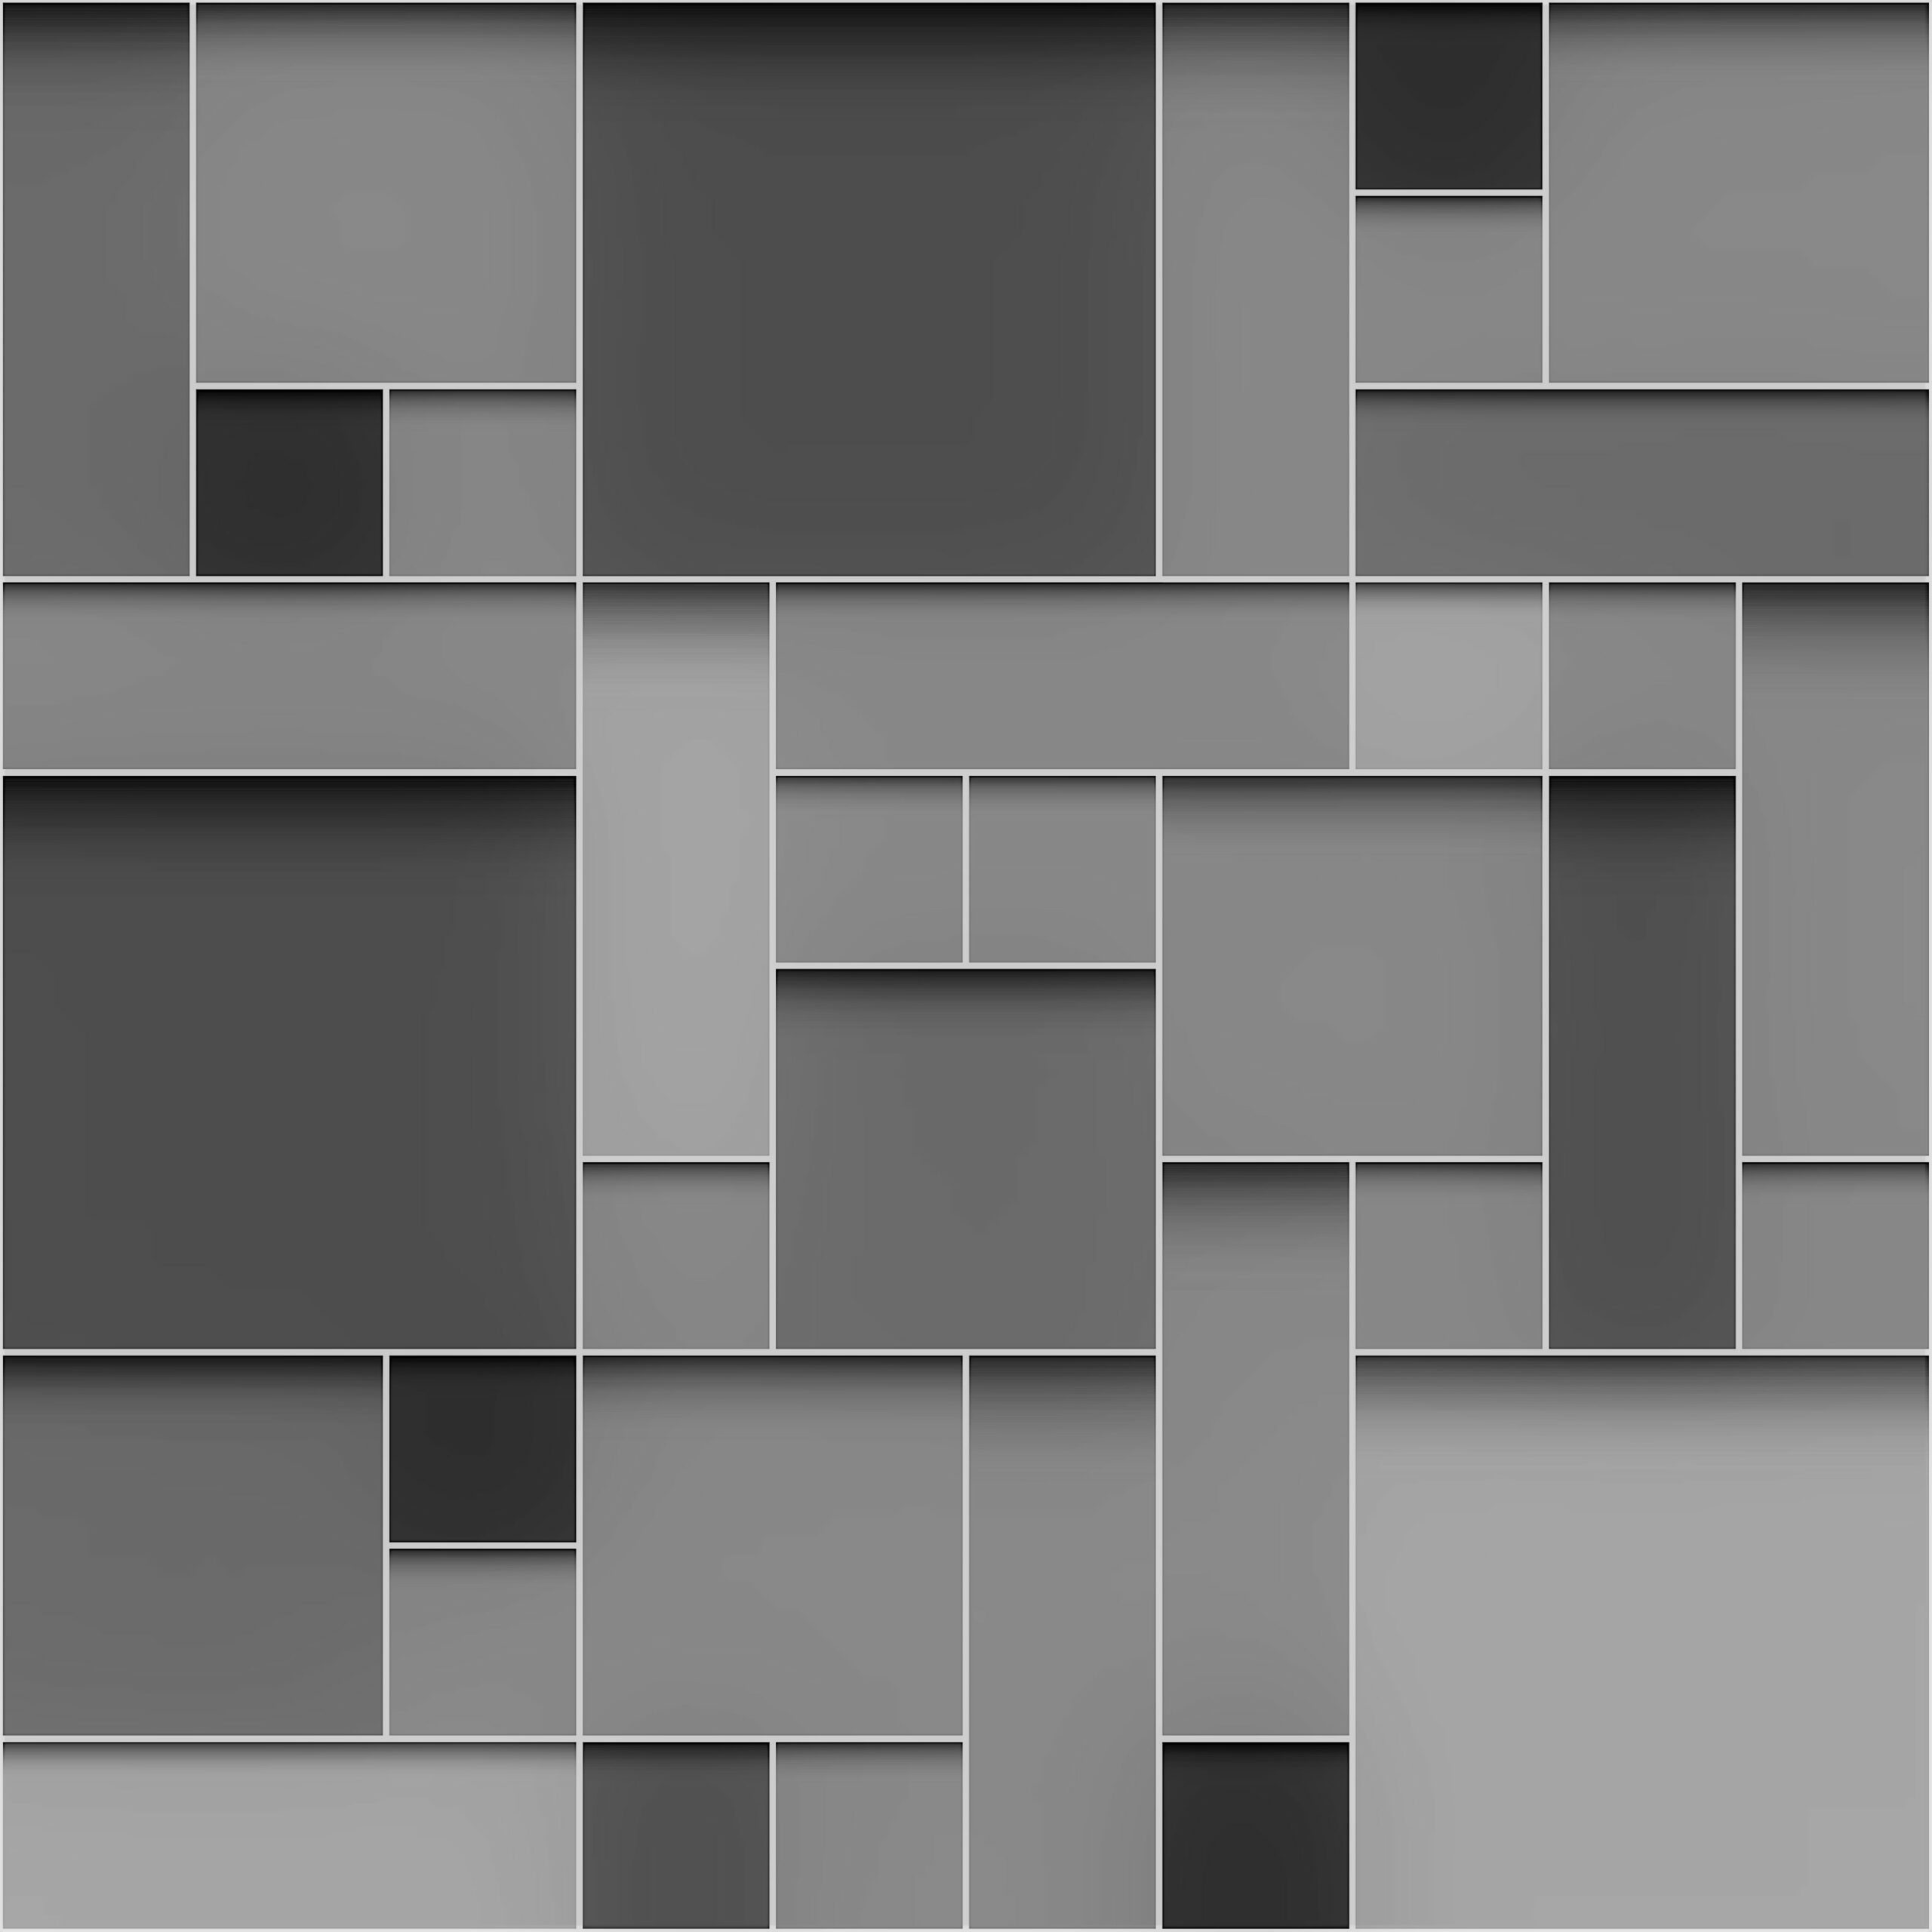 Abstract collage of grey 4 sided shapes